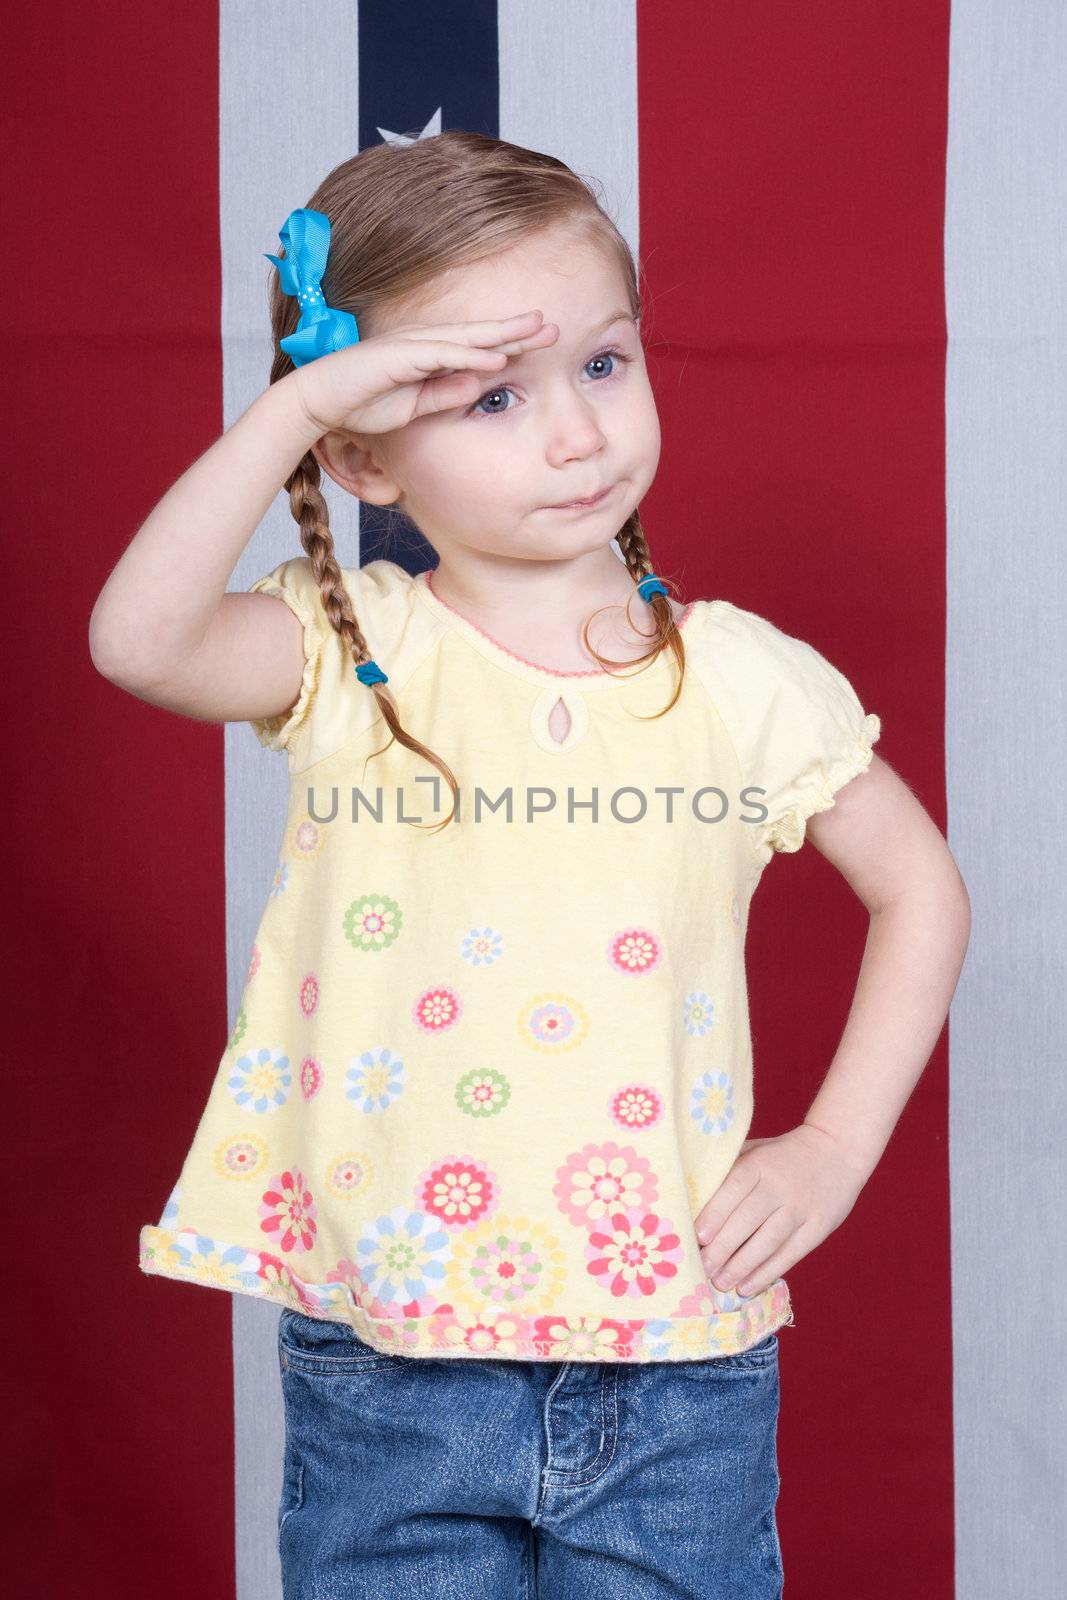 Cute girl saluting with a patriotic design in the background